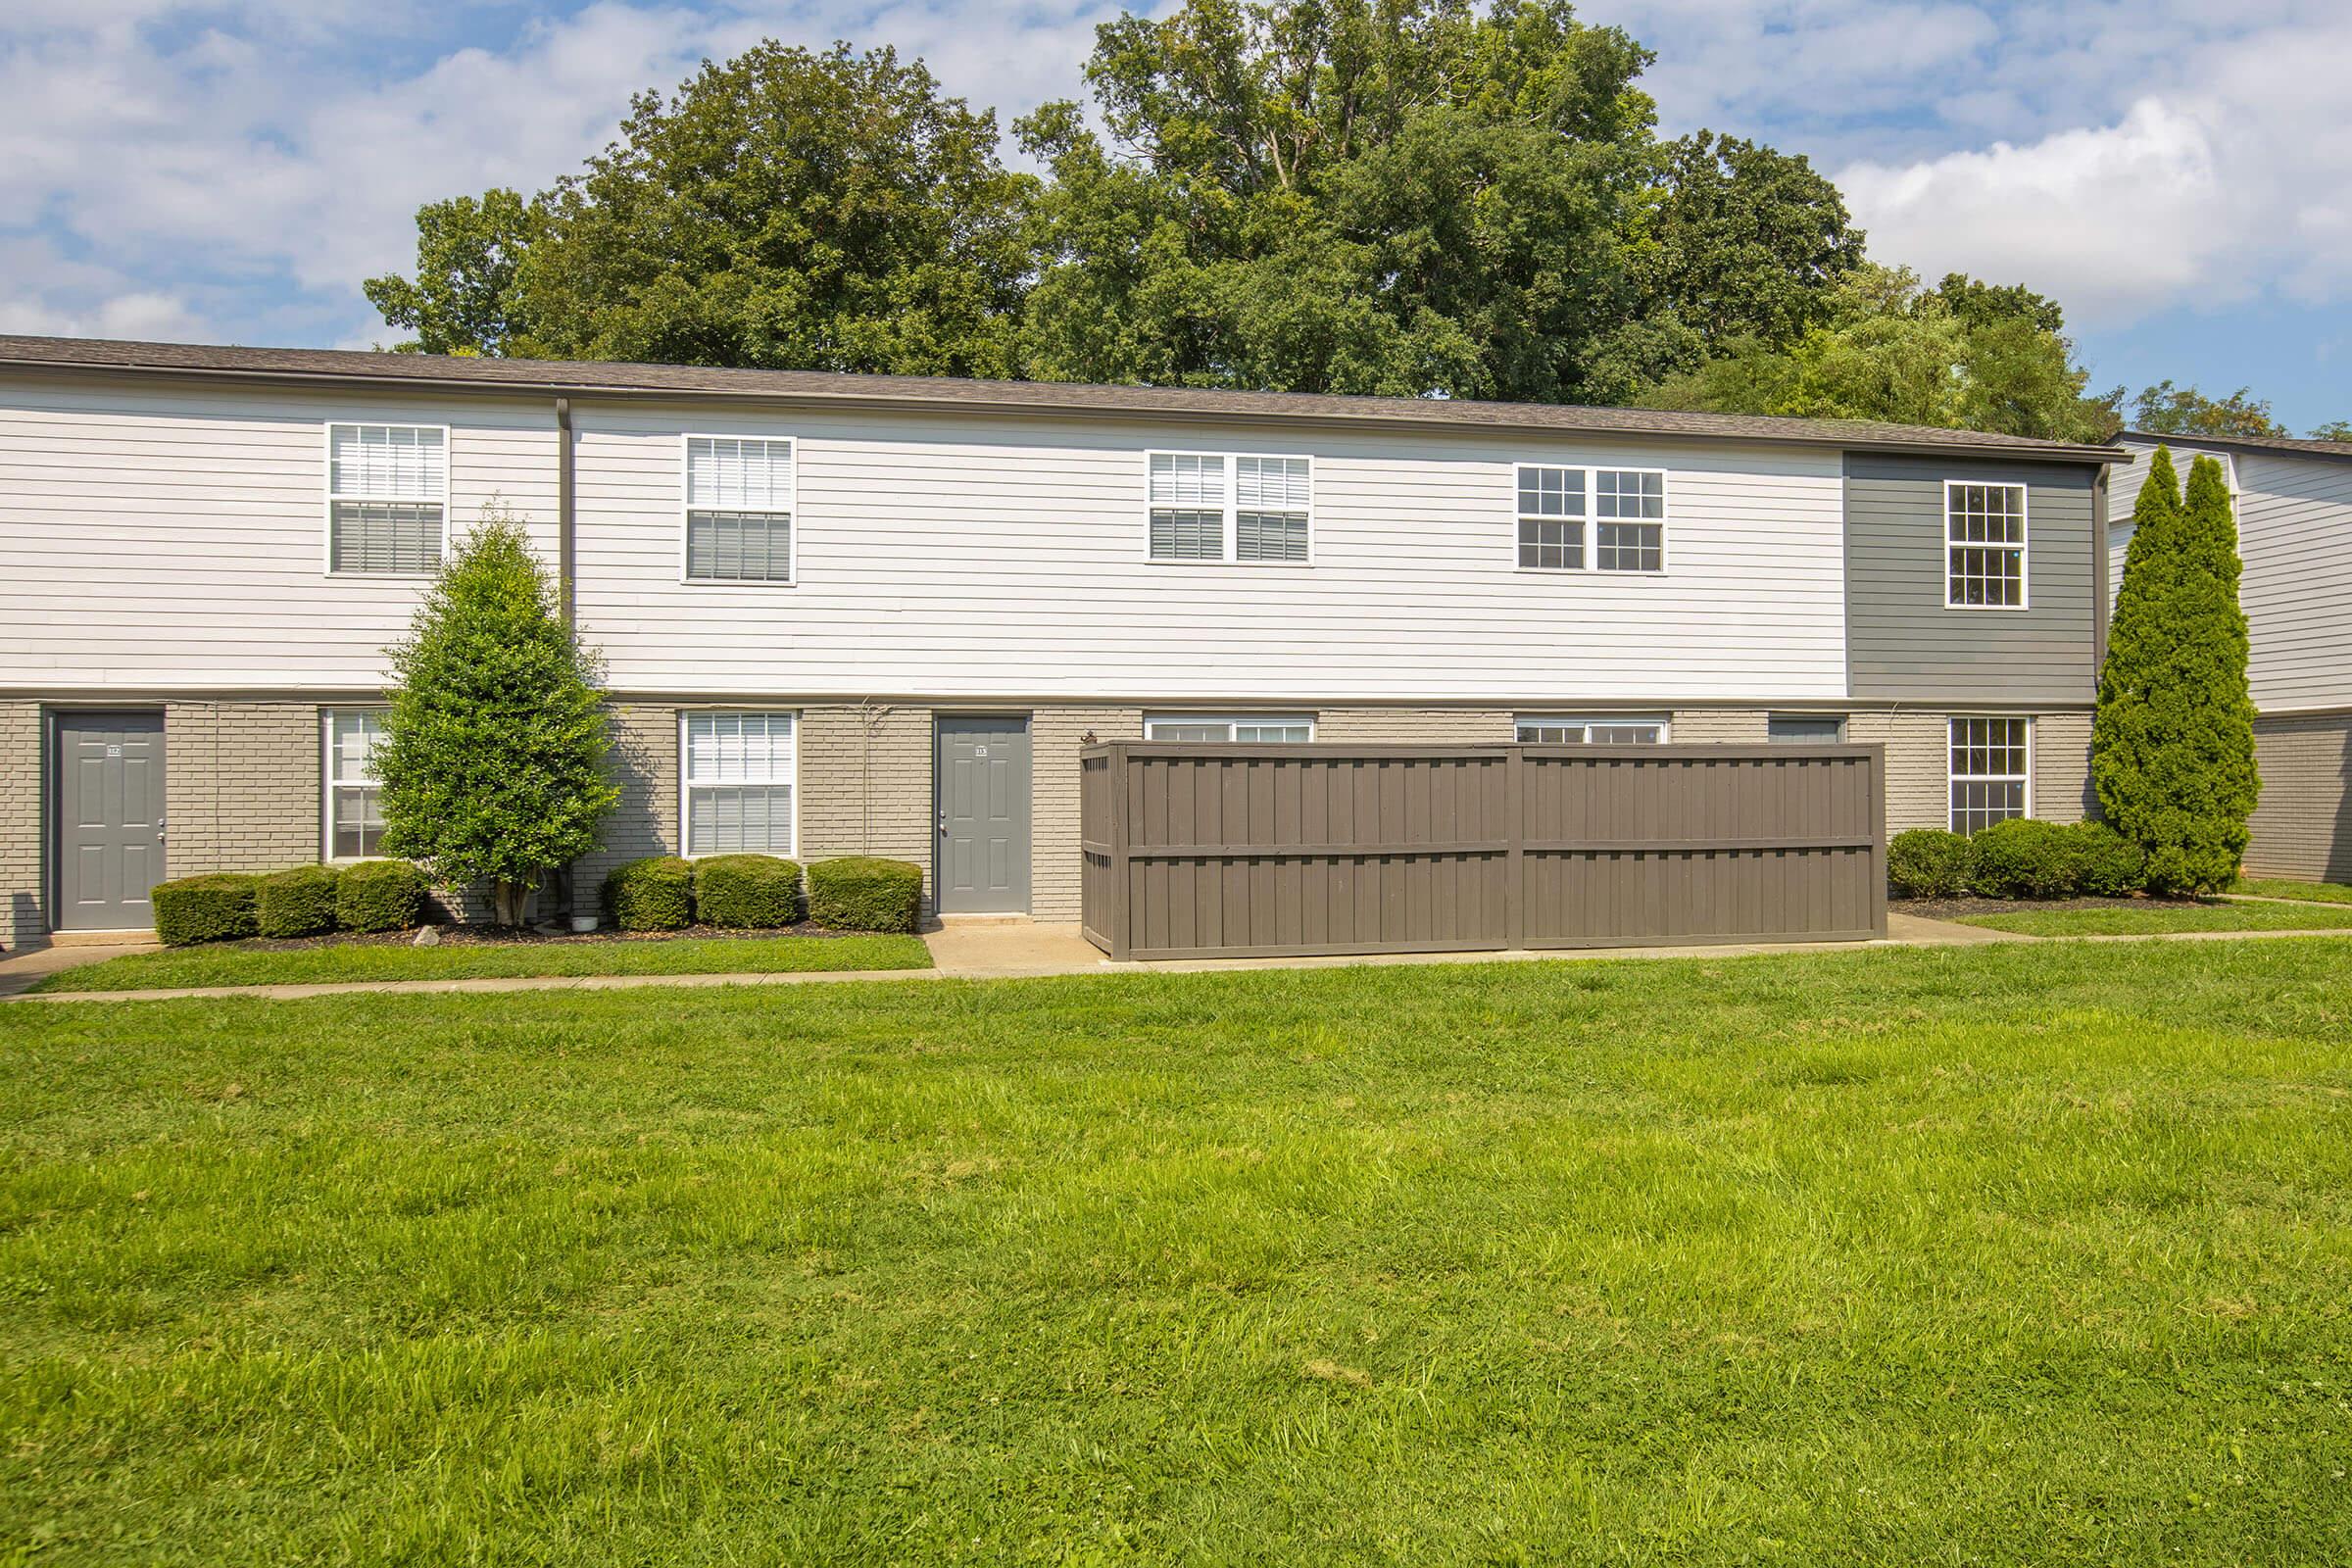 ONE, TWO AND THREE BEDROOM APARTMENTS FOR RENT IN CLARKSVILLE, TN